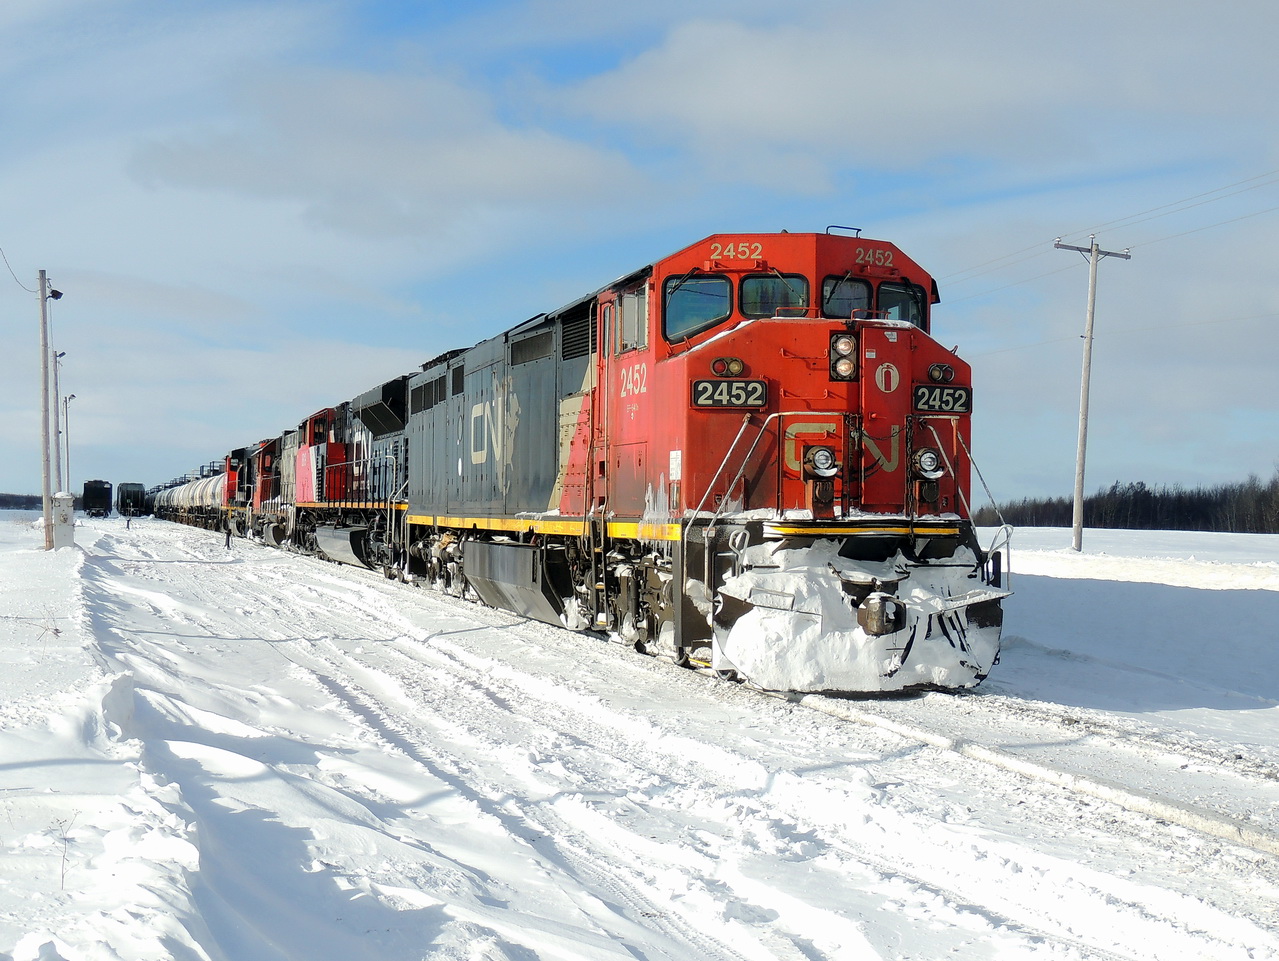 CN 513 just arrived from Bécancour.